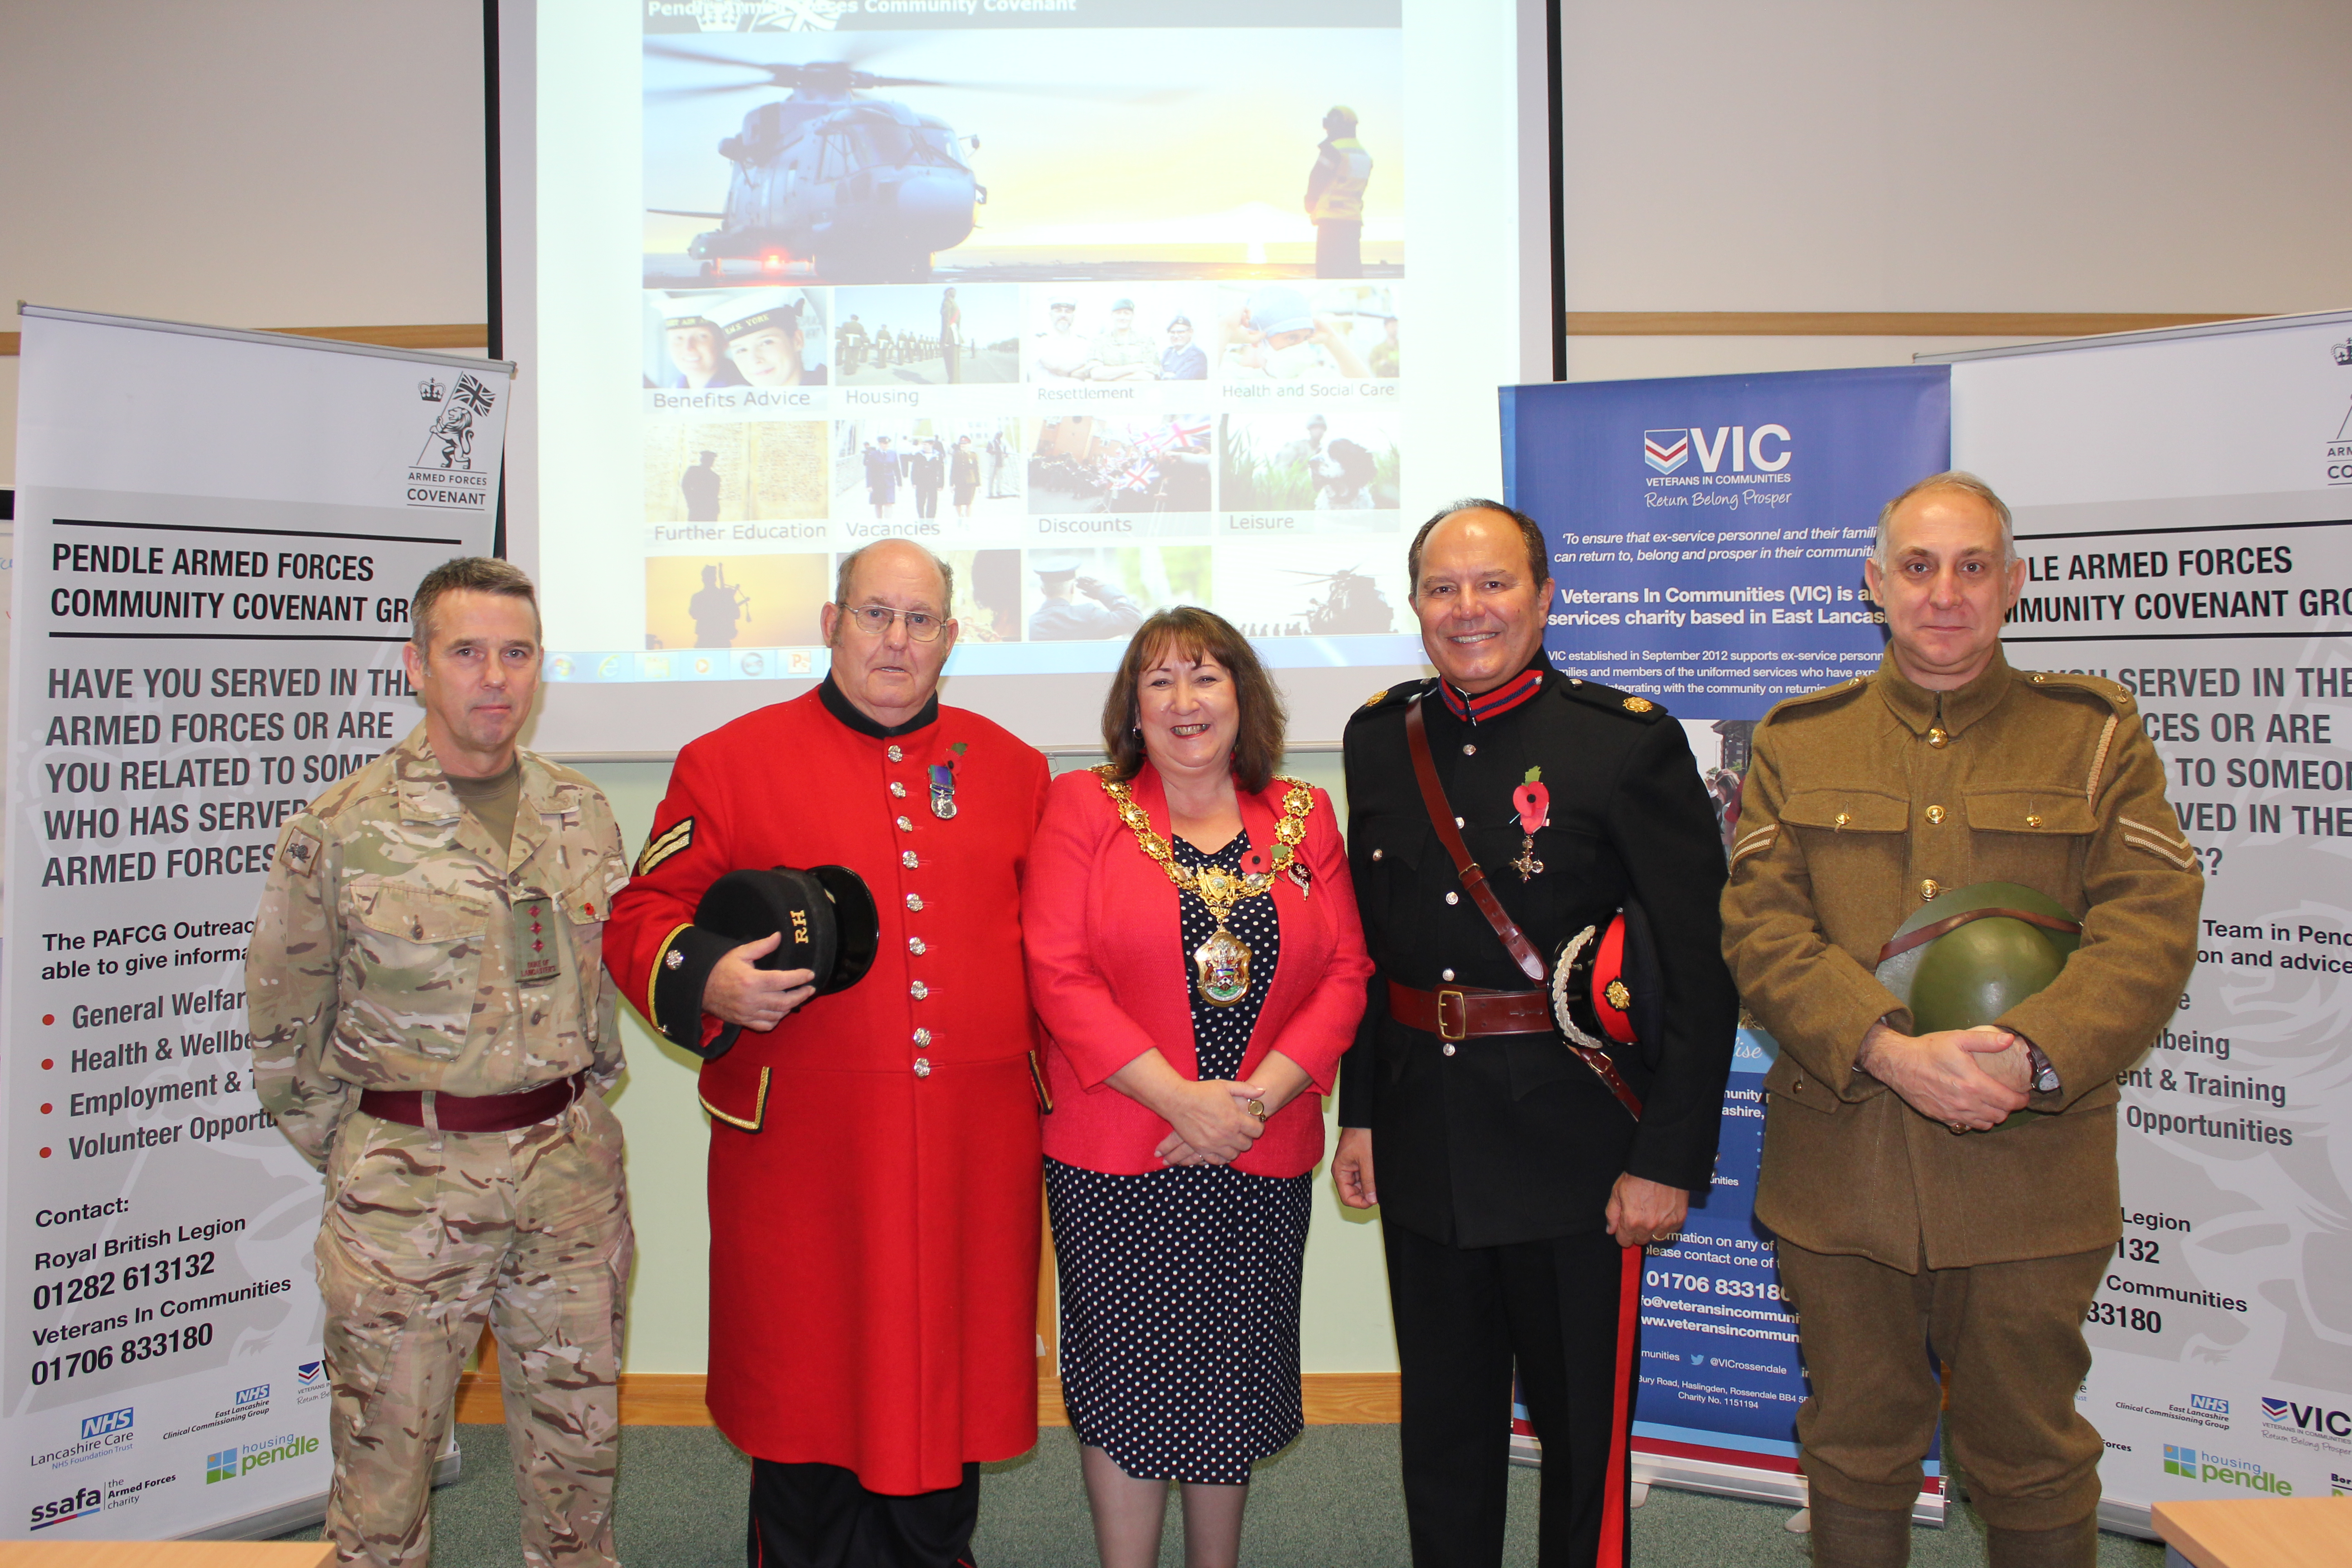 Pendle signs its pledge to the Armed Forces